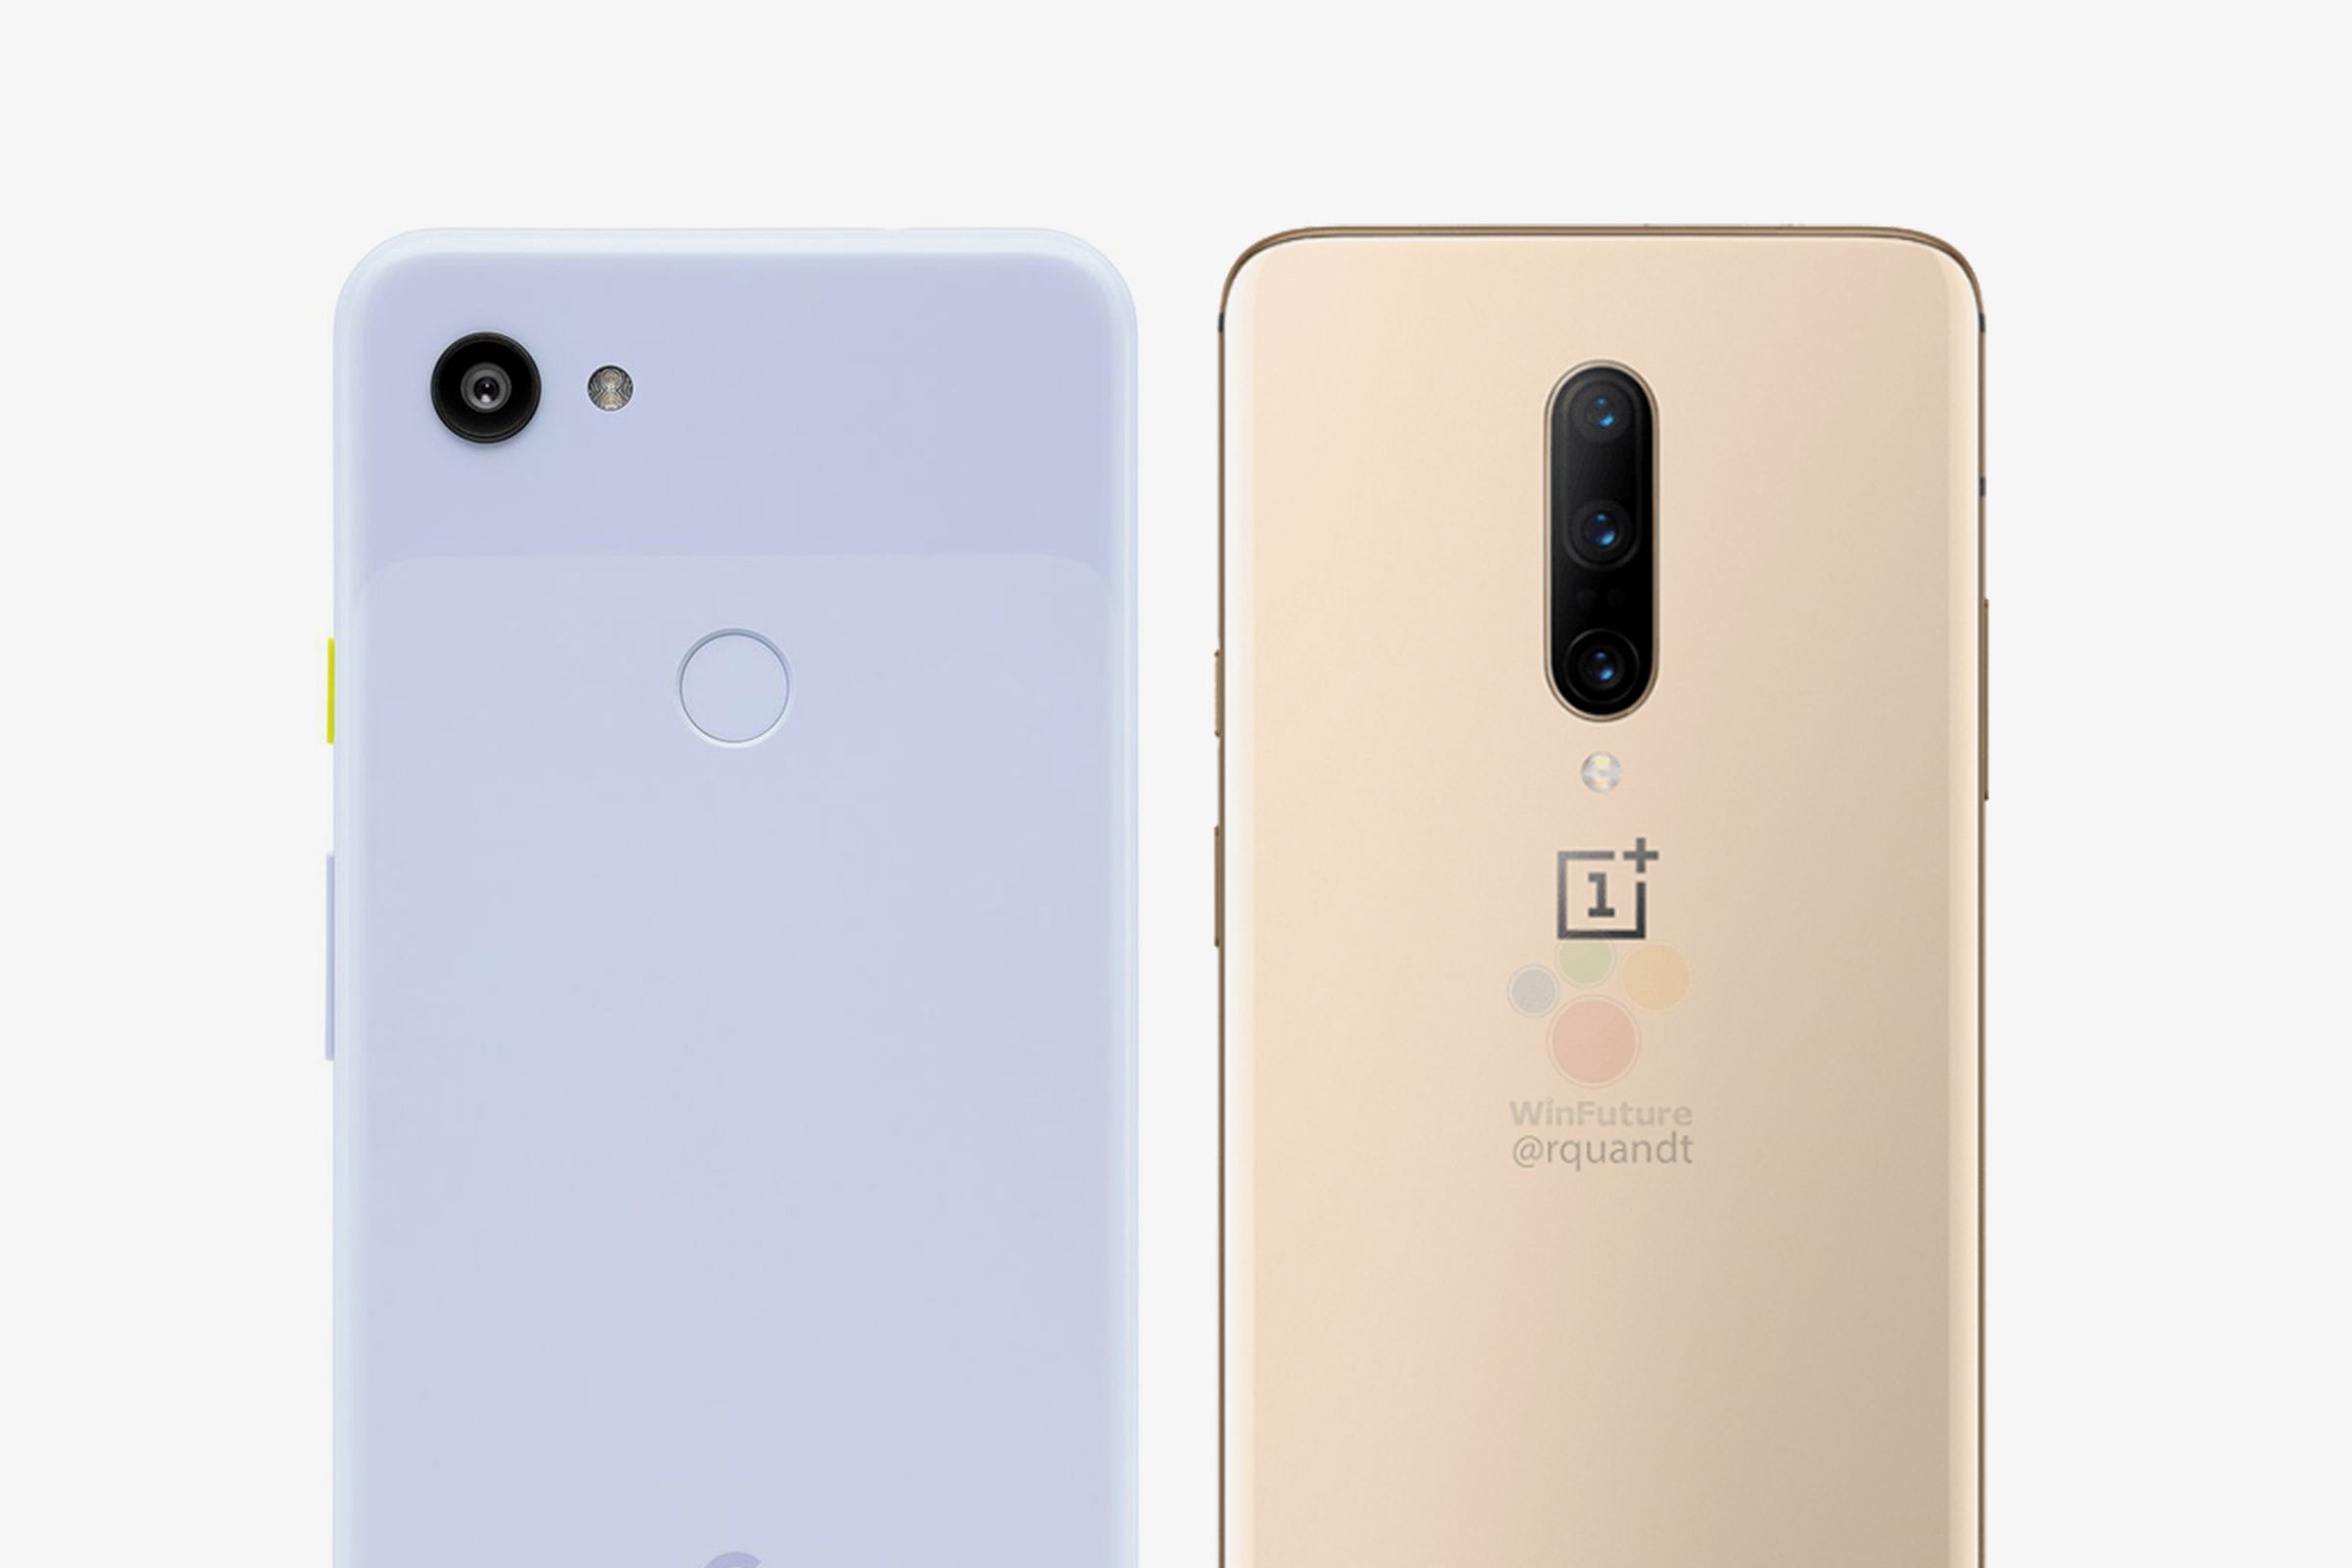 Google Pixel 3A (left) | OnePlus 7 Pro (right)